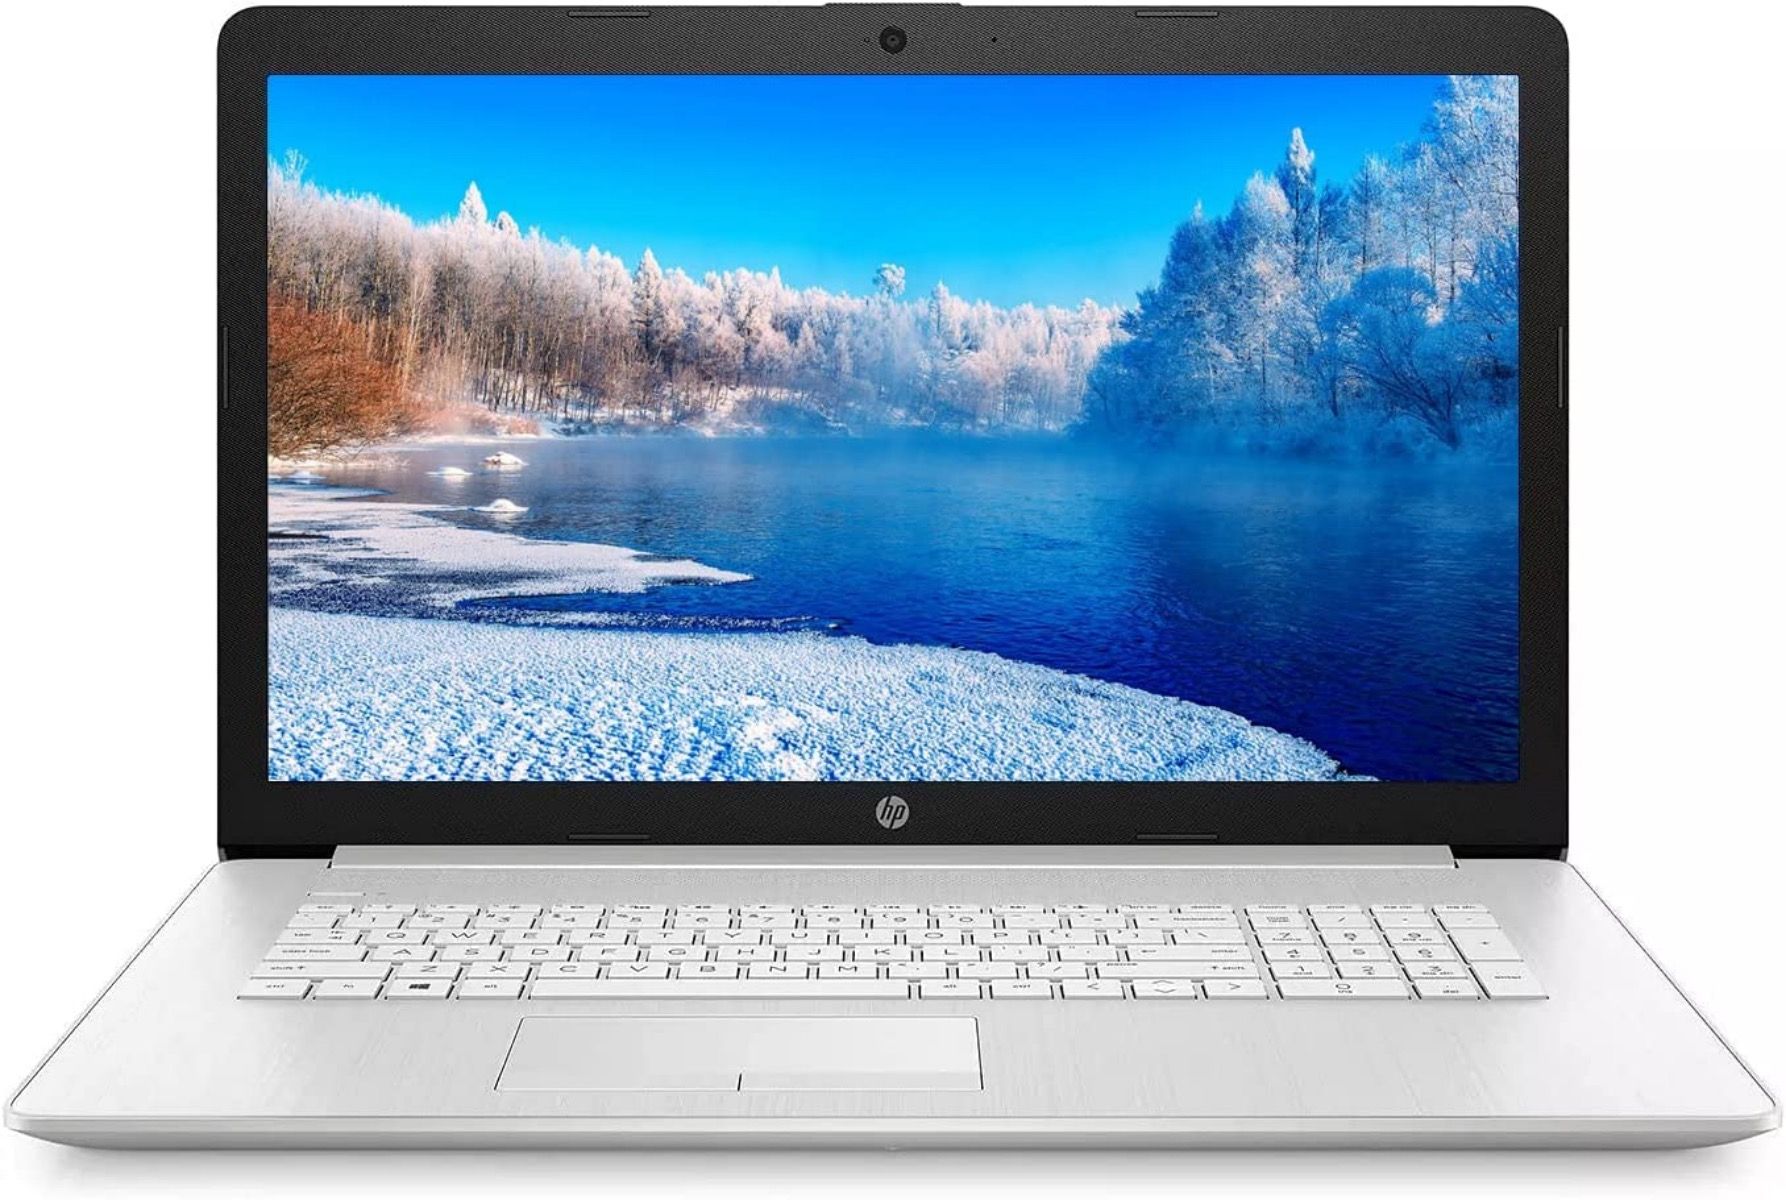 Front of HP Pavilion with screen showing a bright wintry landscape illustrating the screen resolution